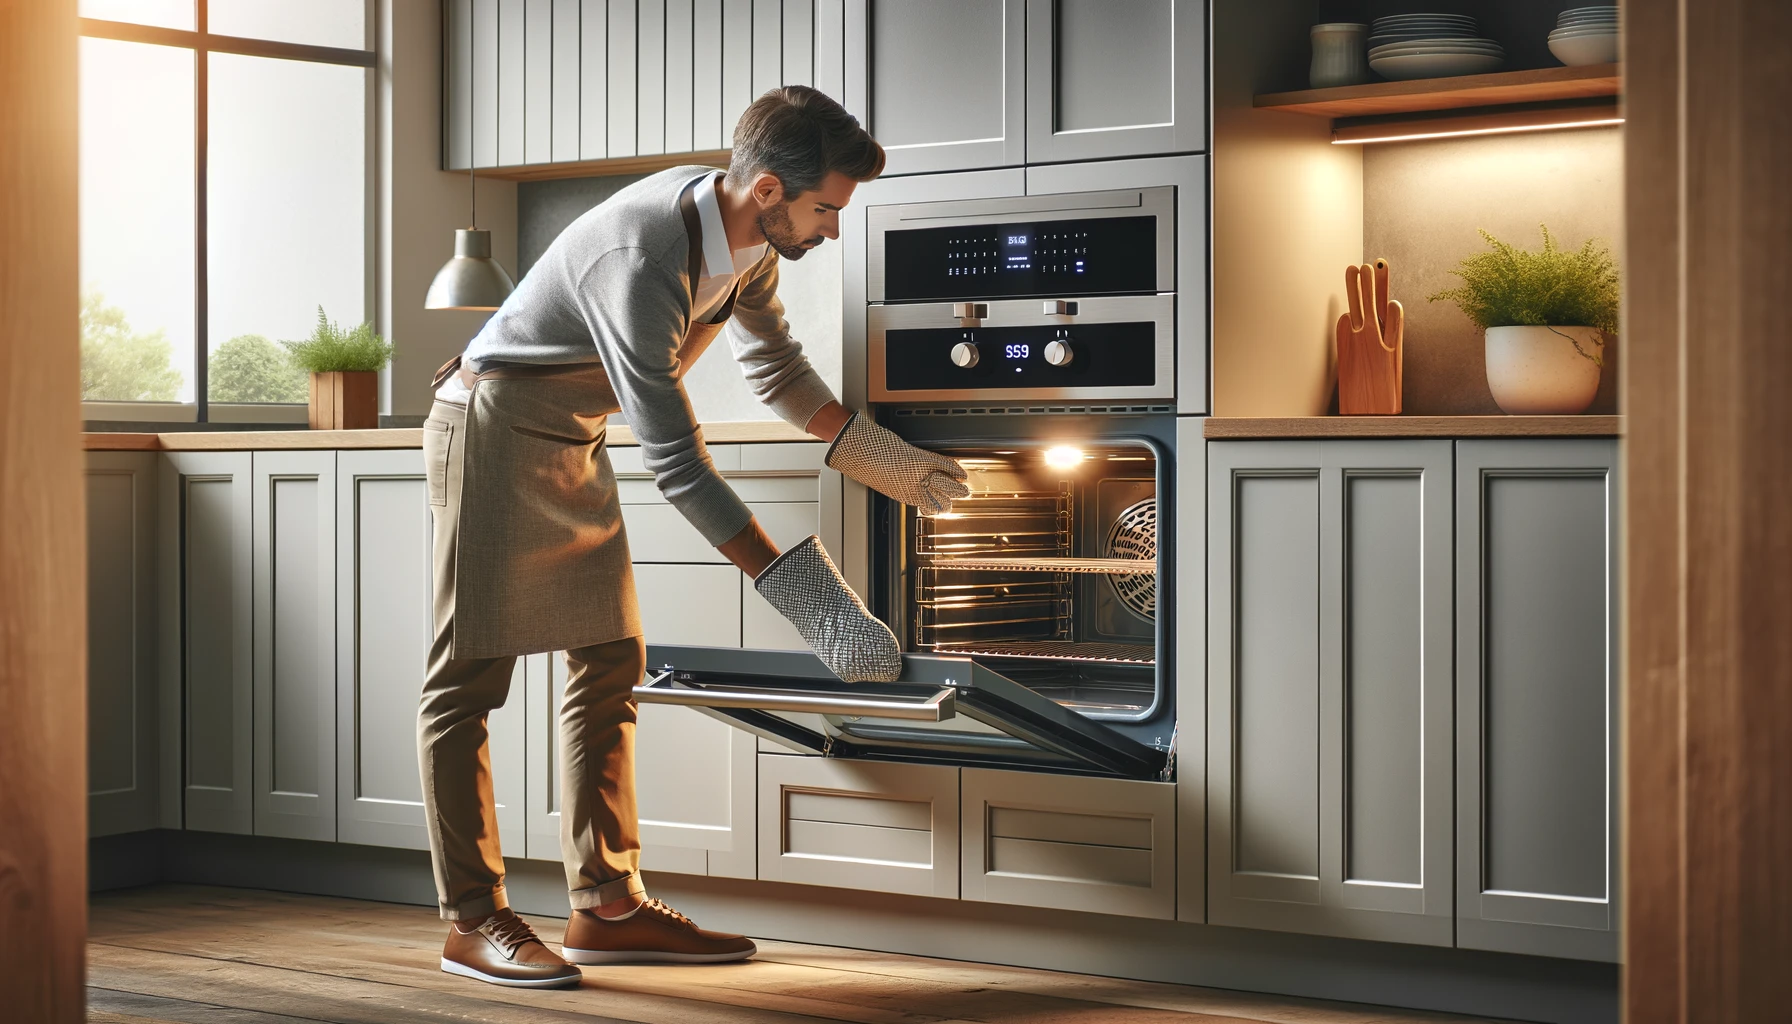 Image of a Homeowner Getting an Oven Ready for the Holidays